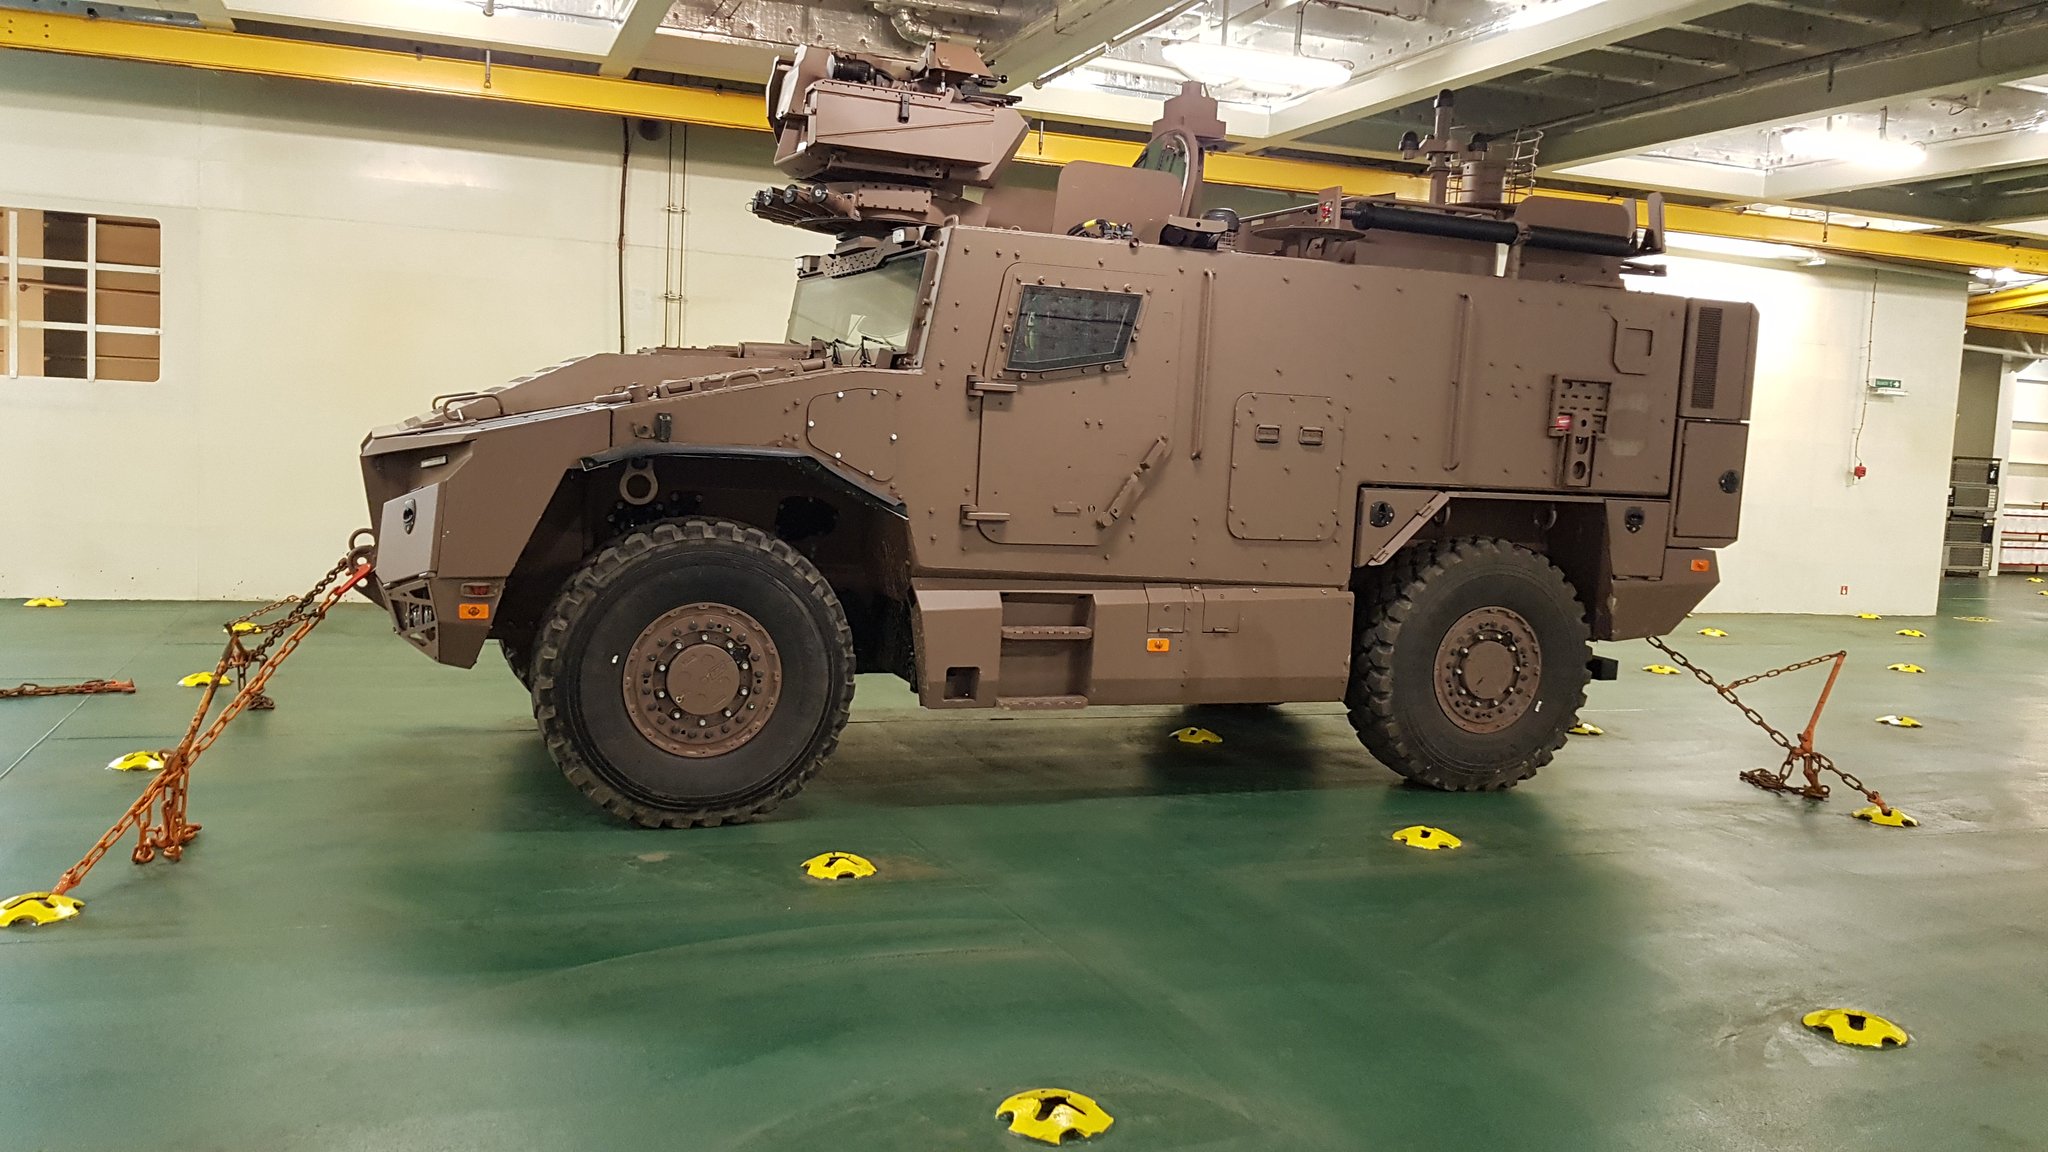 French Directorate General of Armaments Qualifies Serval Armored Vehiclefor Amphibious Operation